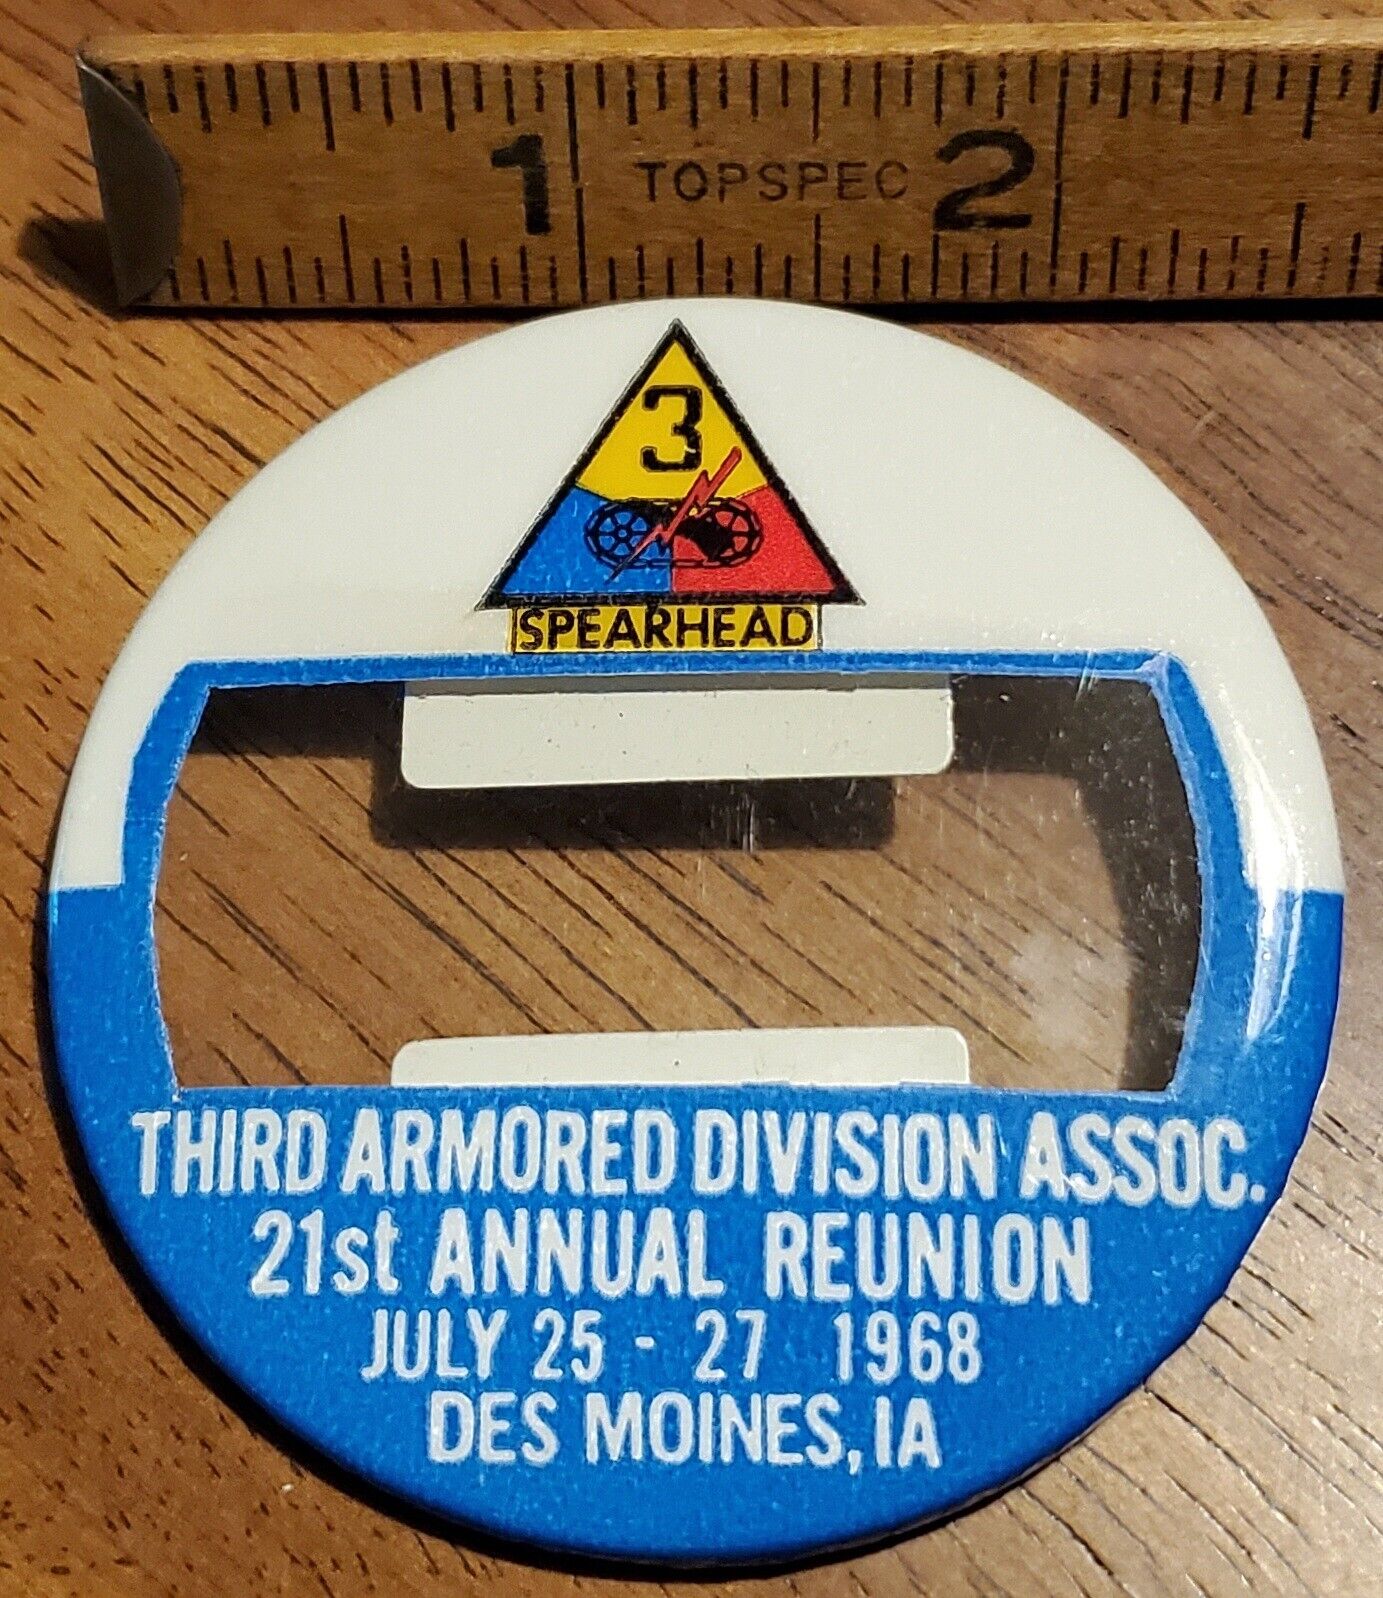 Vtg 1968 ARMY 3rd ARMOR DIVISION ASSOC-Des Moines IA ID BADGE PINBACK Button Pin